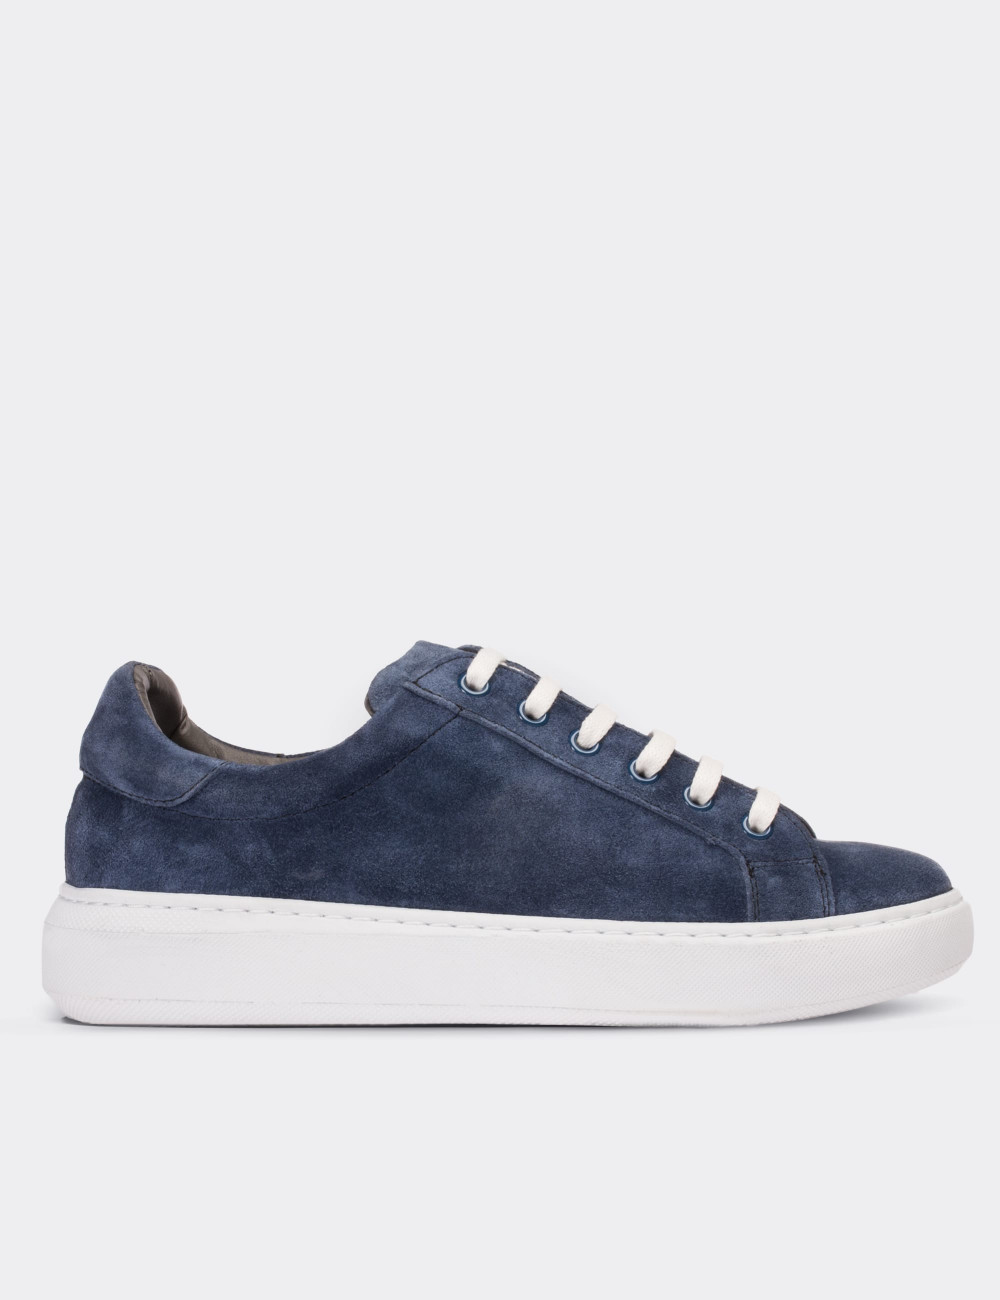 Navy Suede Leather Sneakers - 01698ZLCVP01